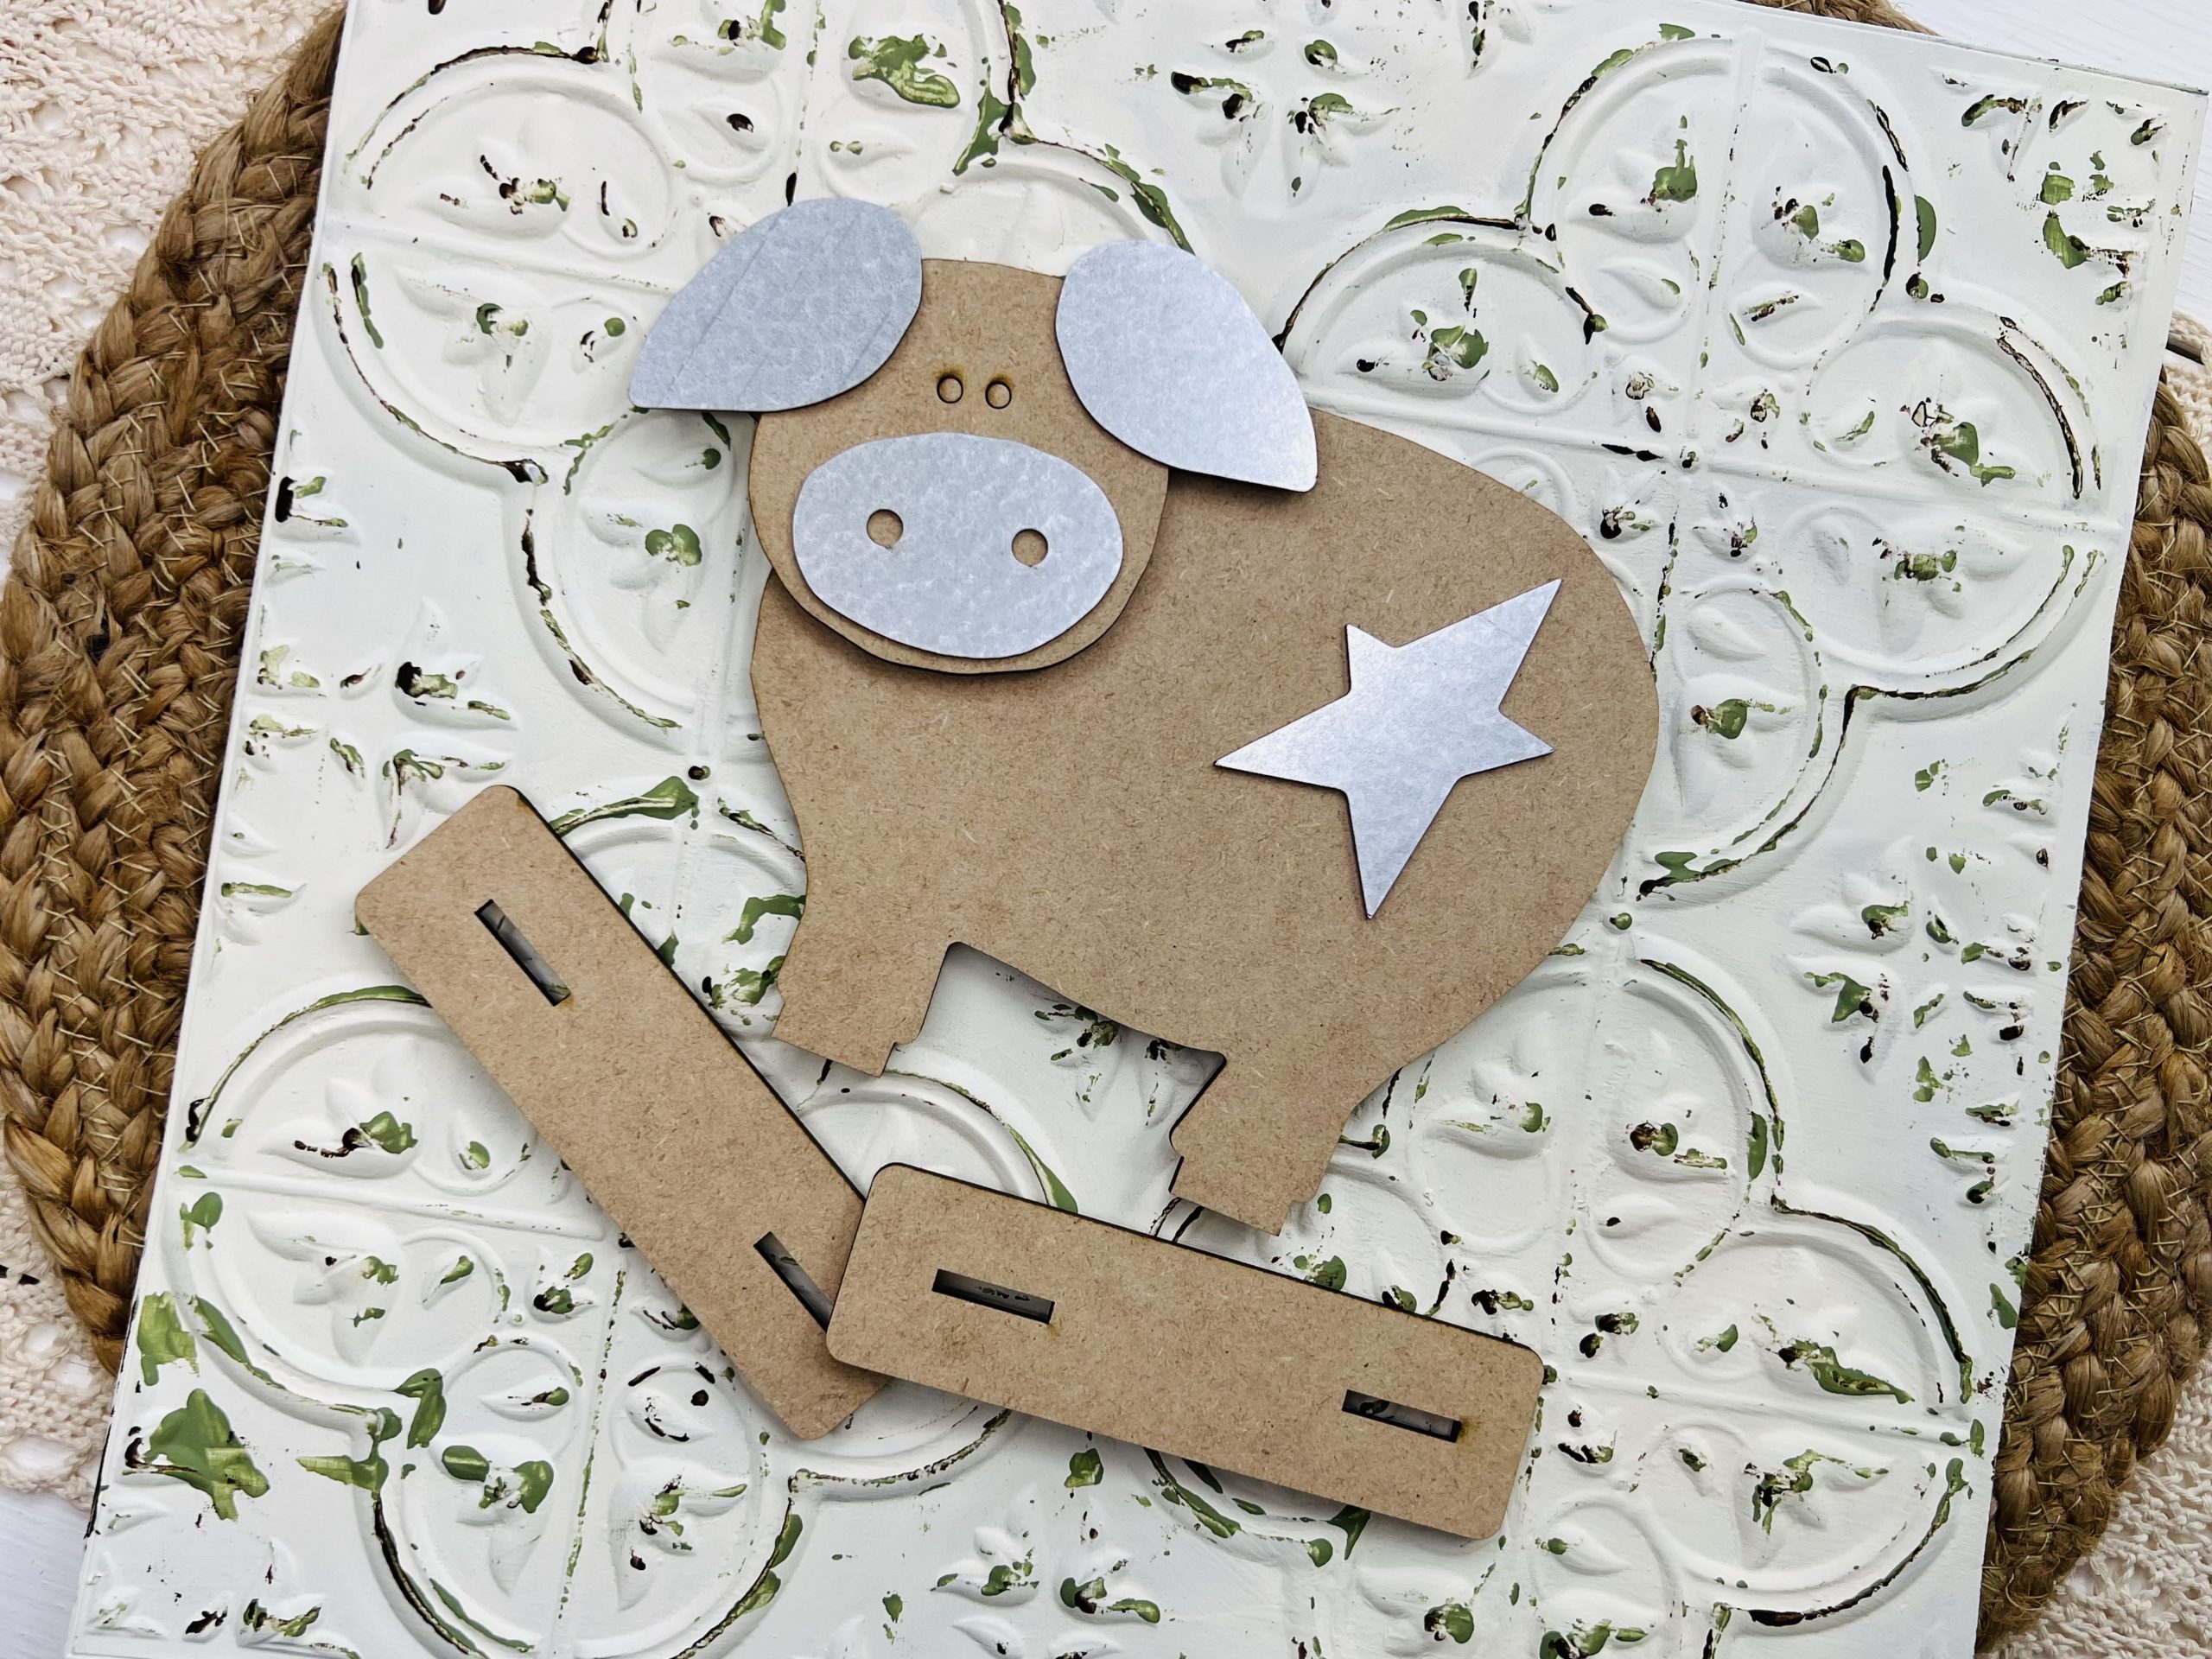 This is a primitive pig wood and metal cutout to craft with